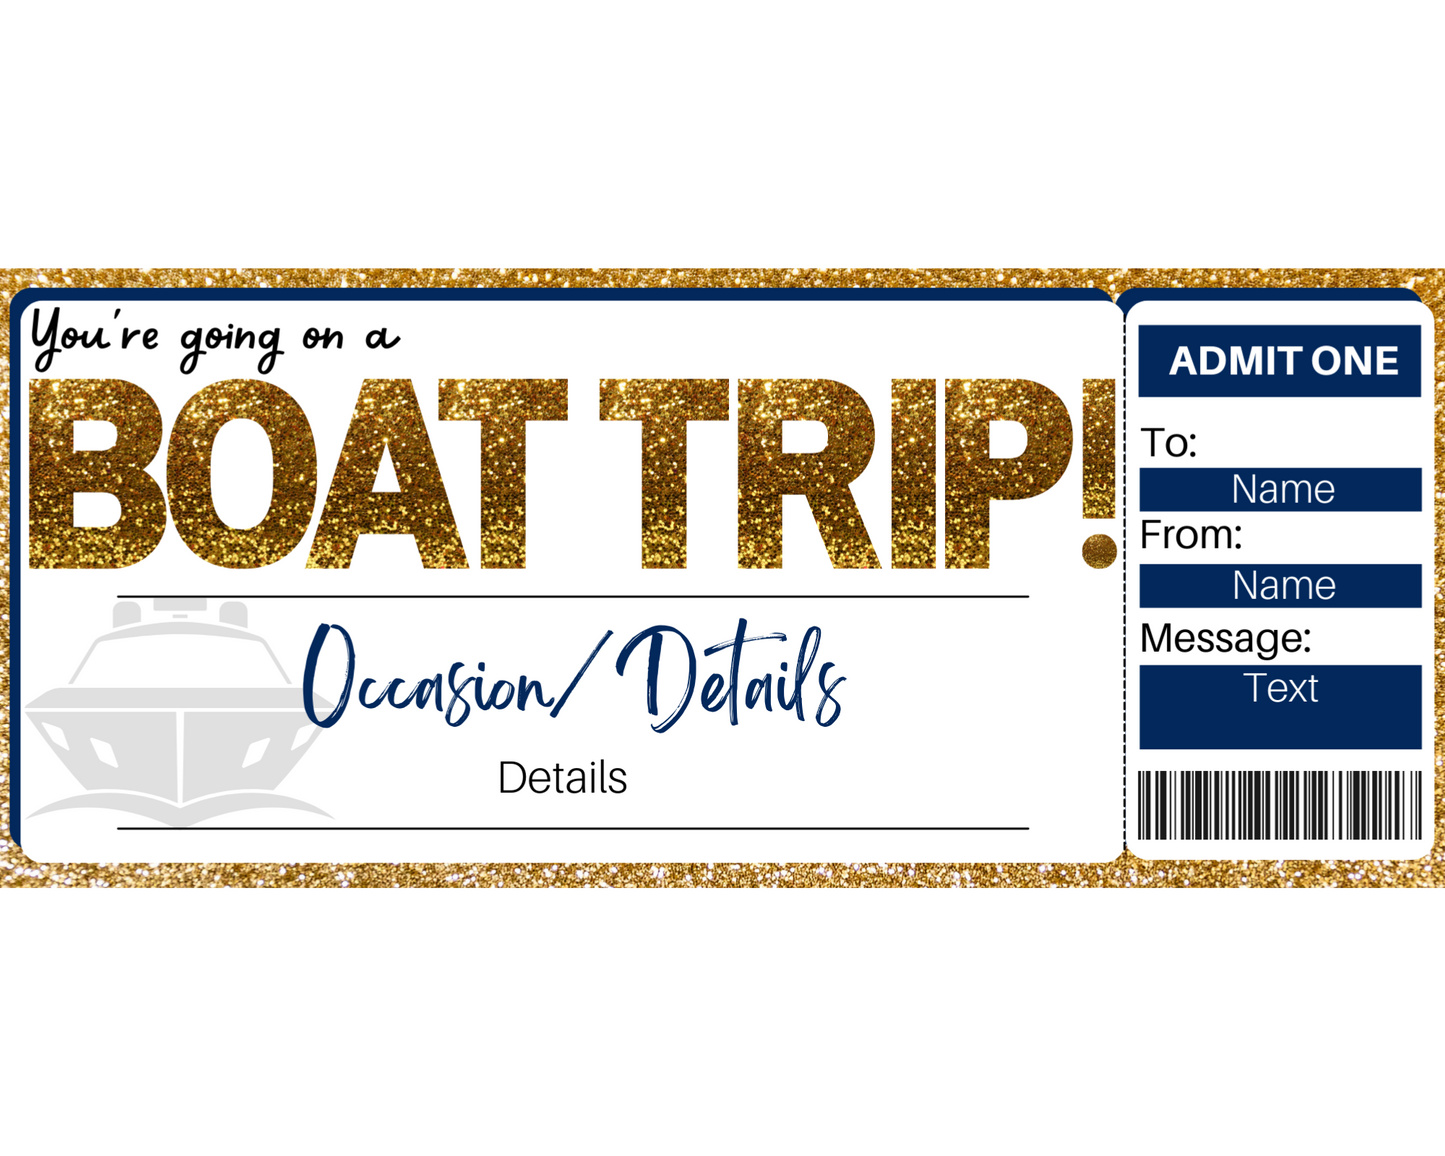 Boat Trip Gift Ticket Template